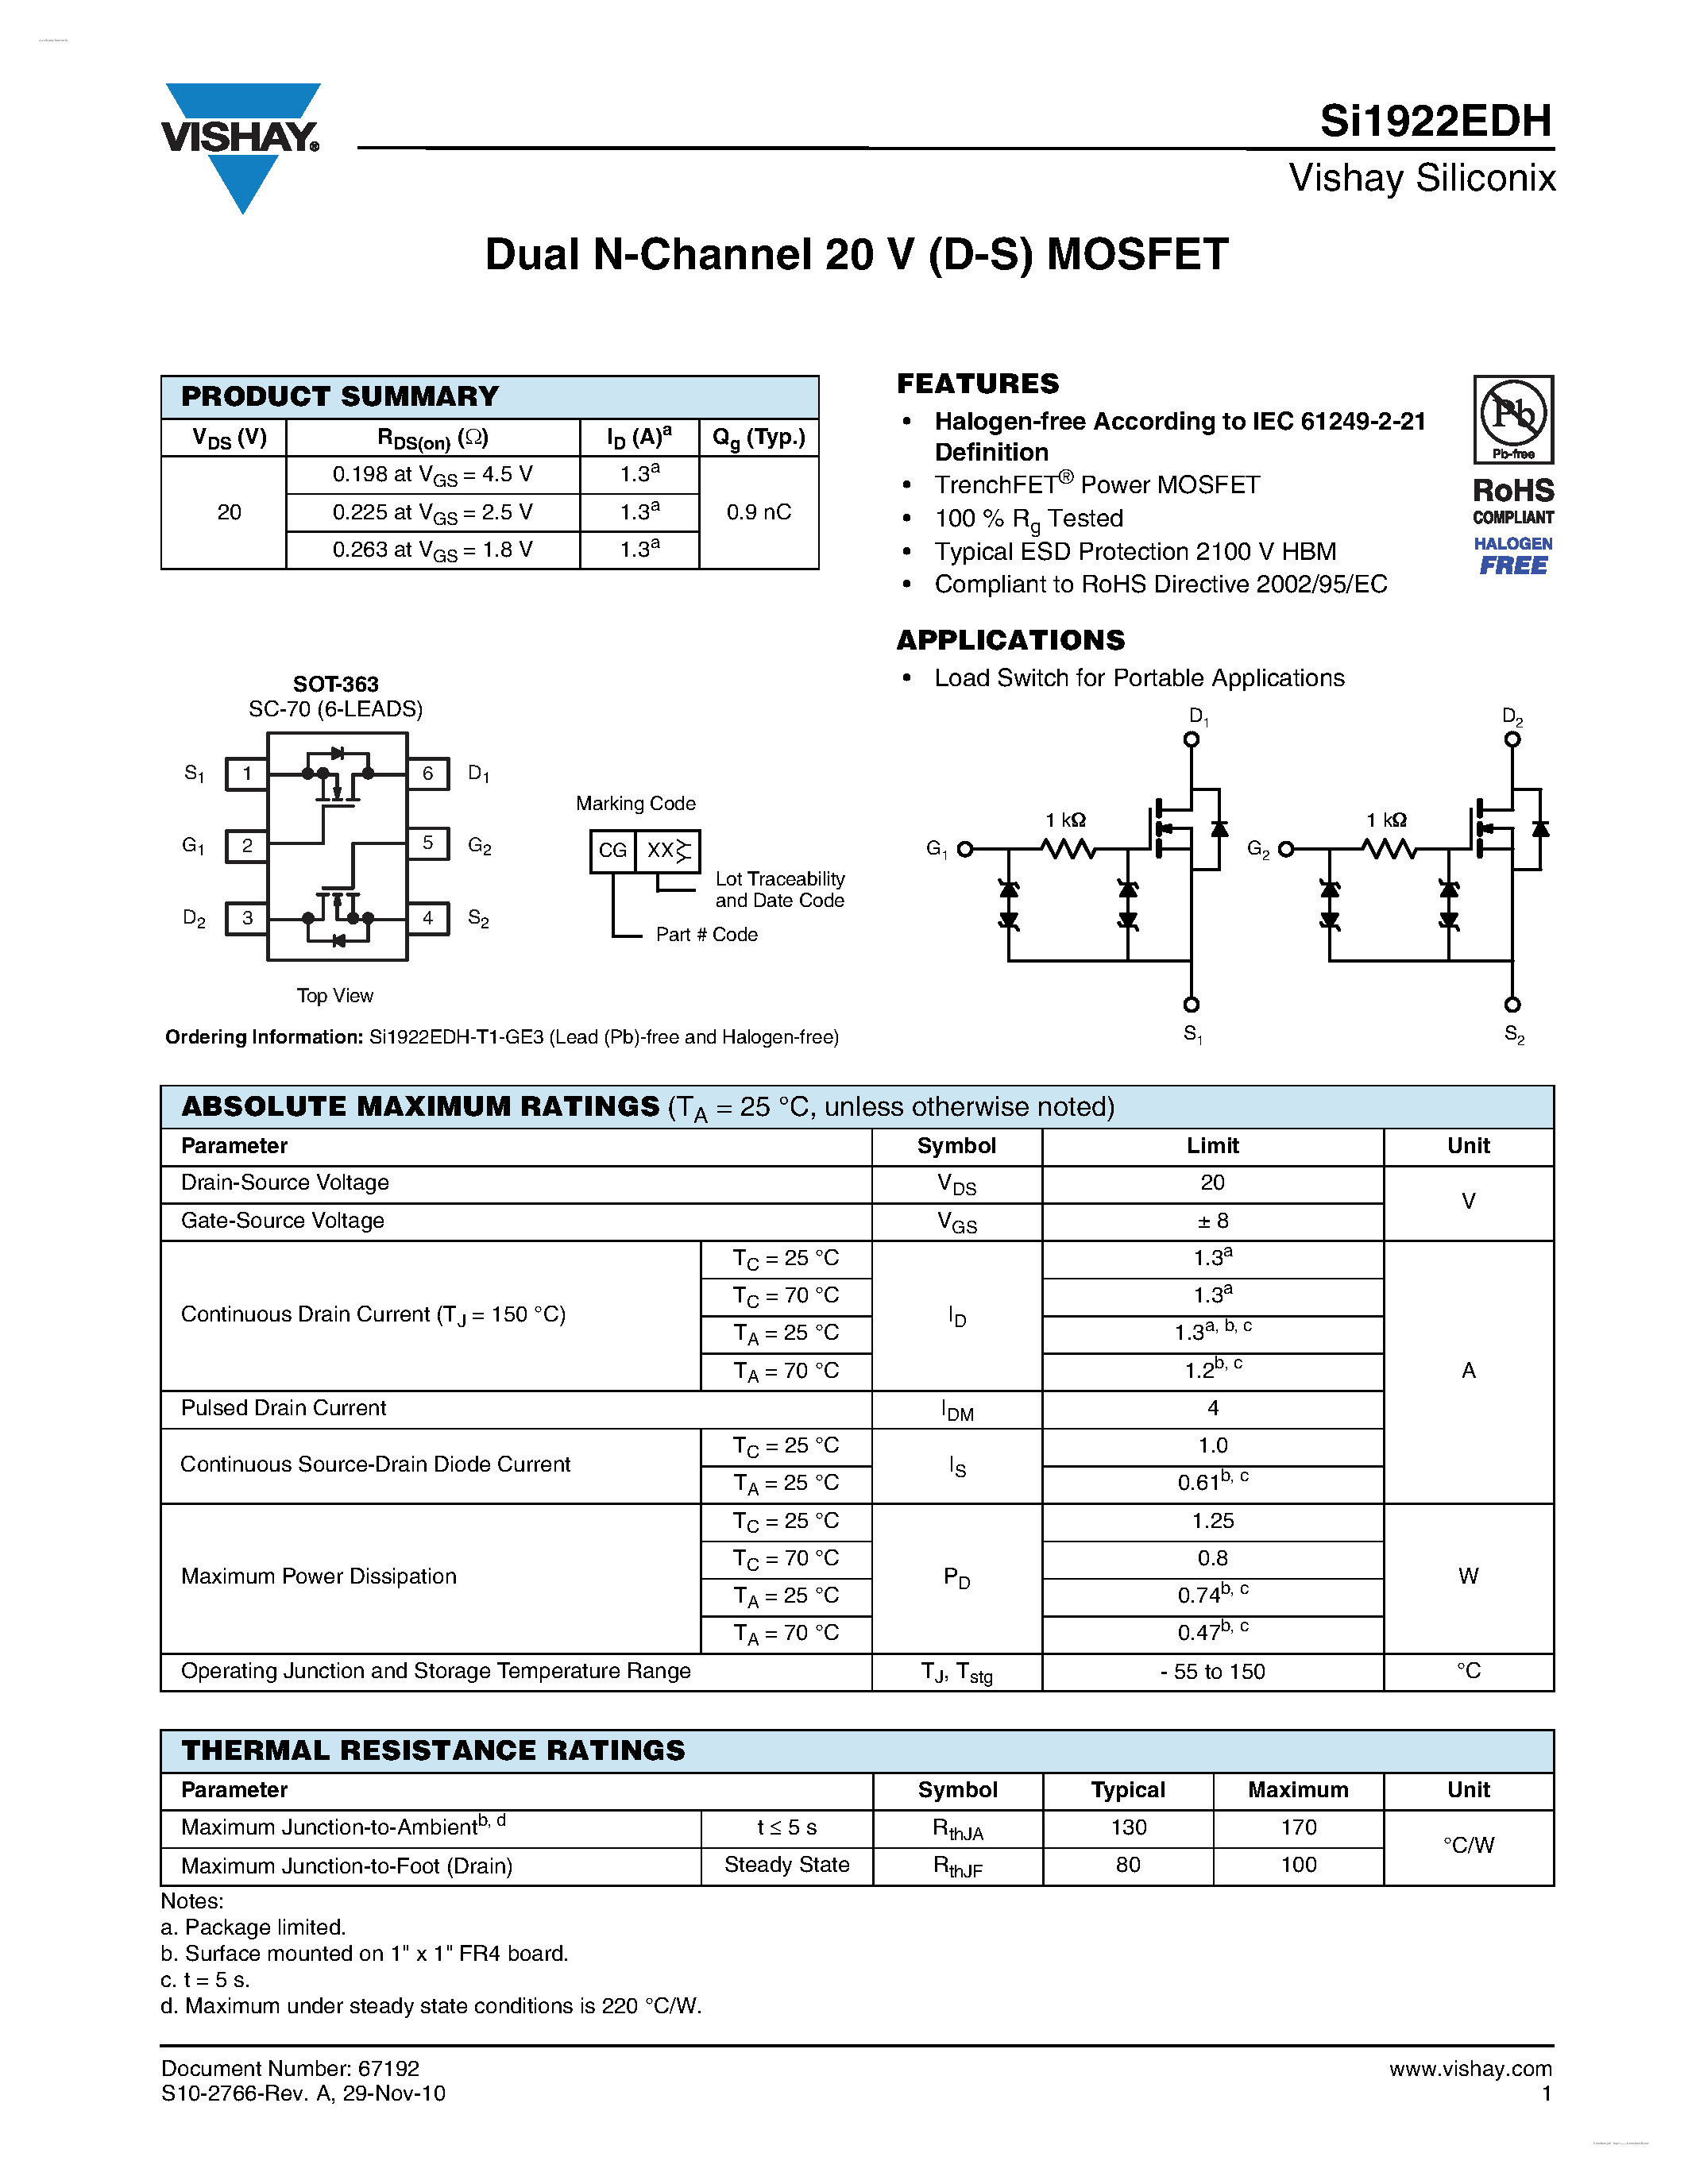 Datasheet SI1922EDH - Dual N-Channel 20 V (D-S) MOSFET page 1